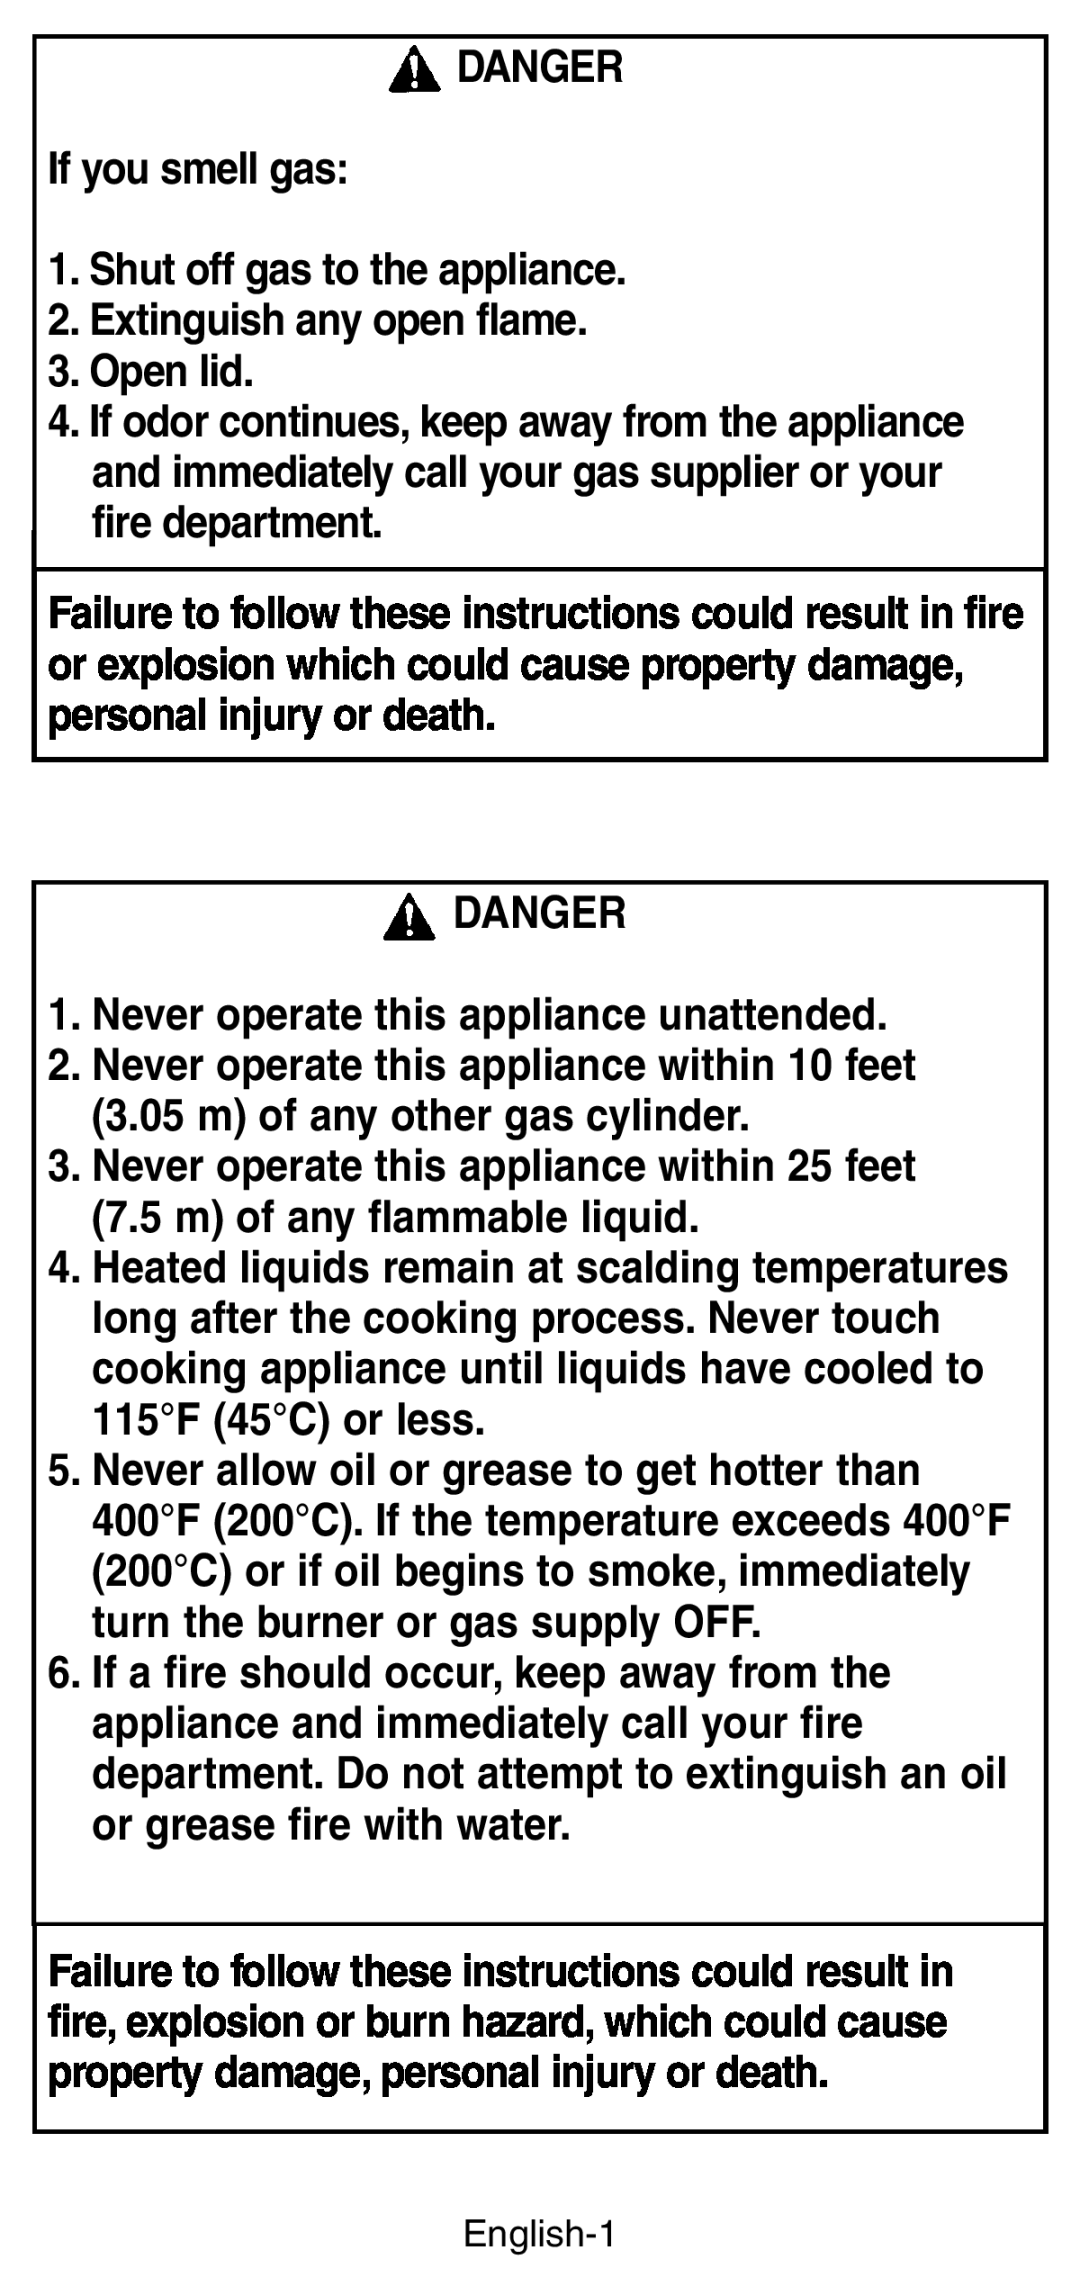 Coleman 9987 Series instruction manual DANGER If you smell gas 1. Shut off gas to the appliance 